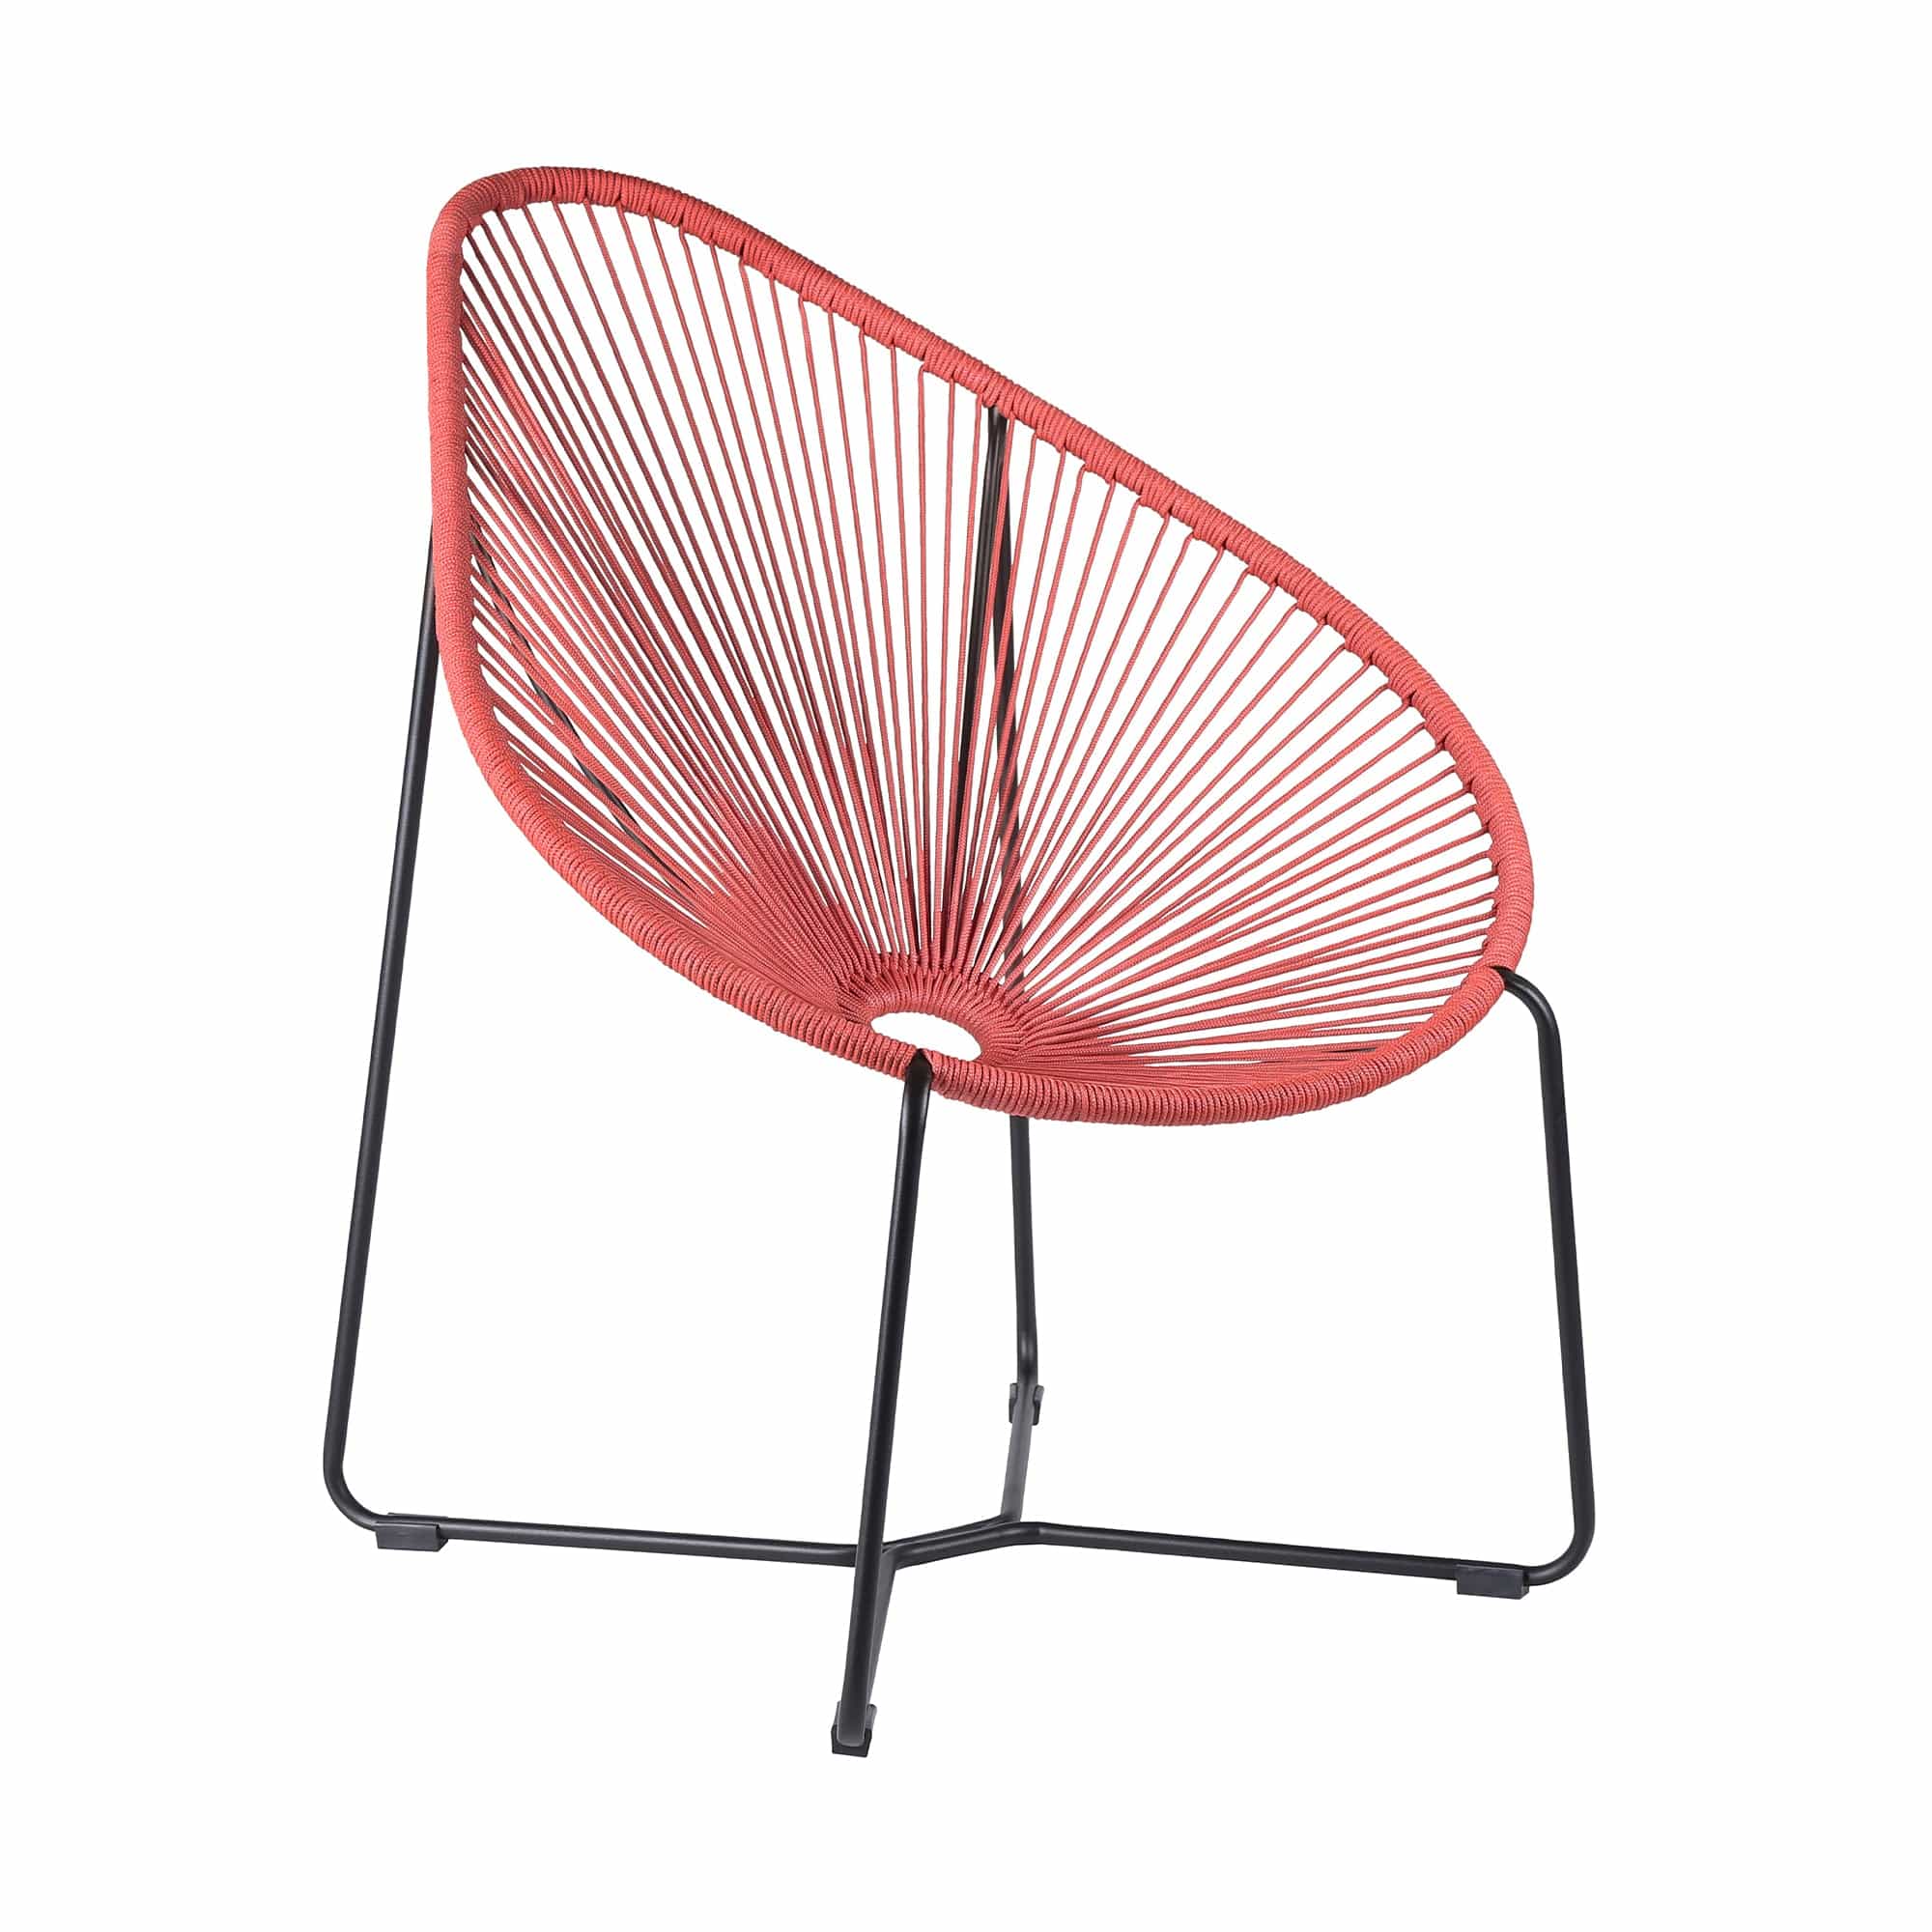 Armen Living Outdoor Lounge Chair Brick Red Armen Living | Acapulco Indoor Outdoor Steel Papasan Lounge Chair with Rope | LCACSI